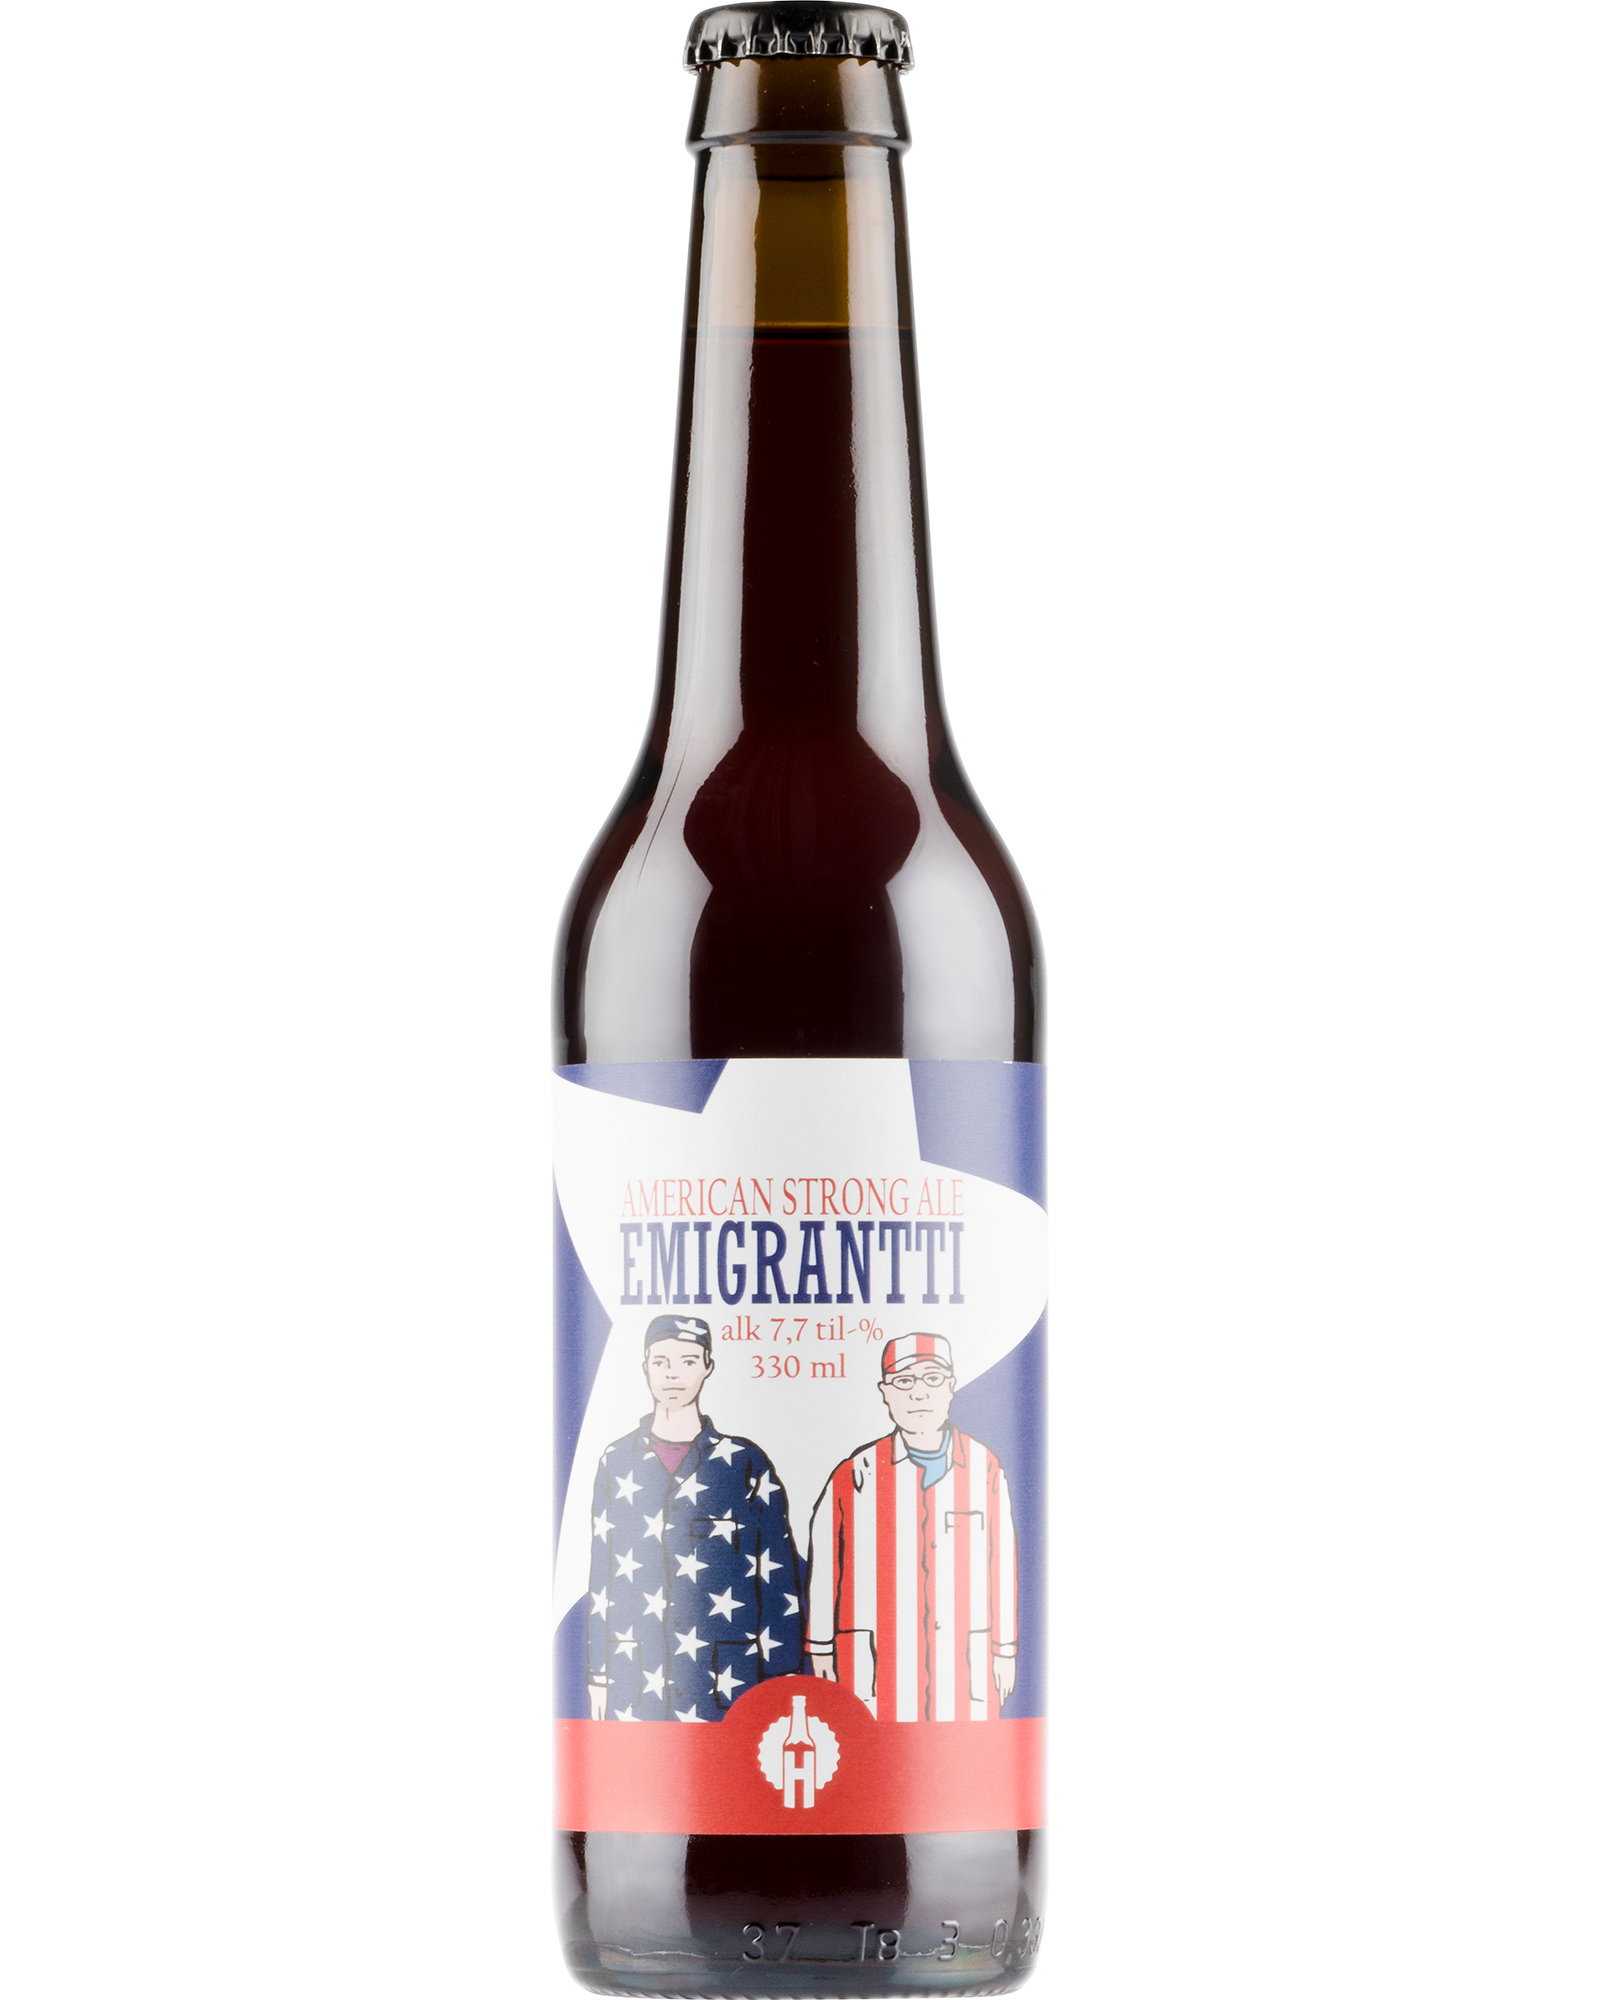 Honkavuoren Emigrantti American Strong ale